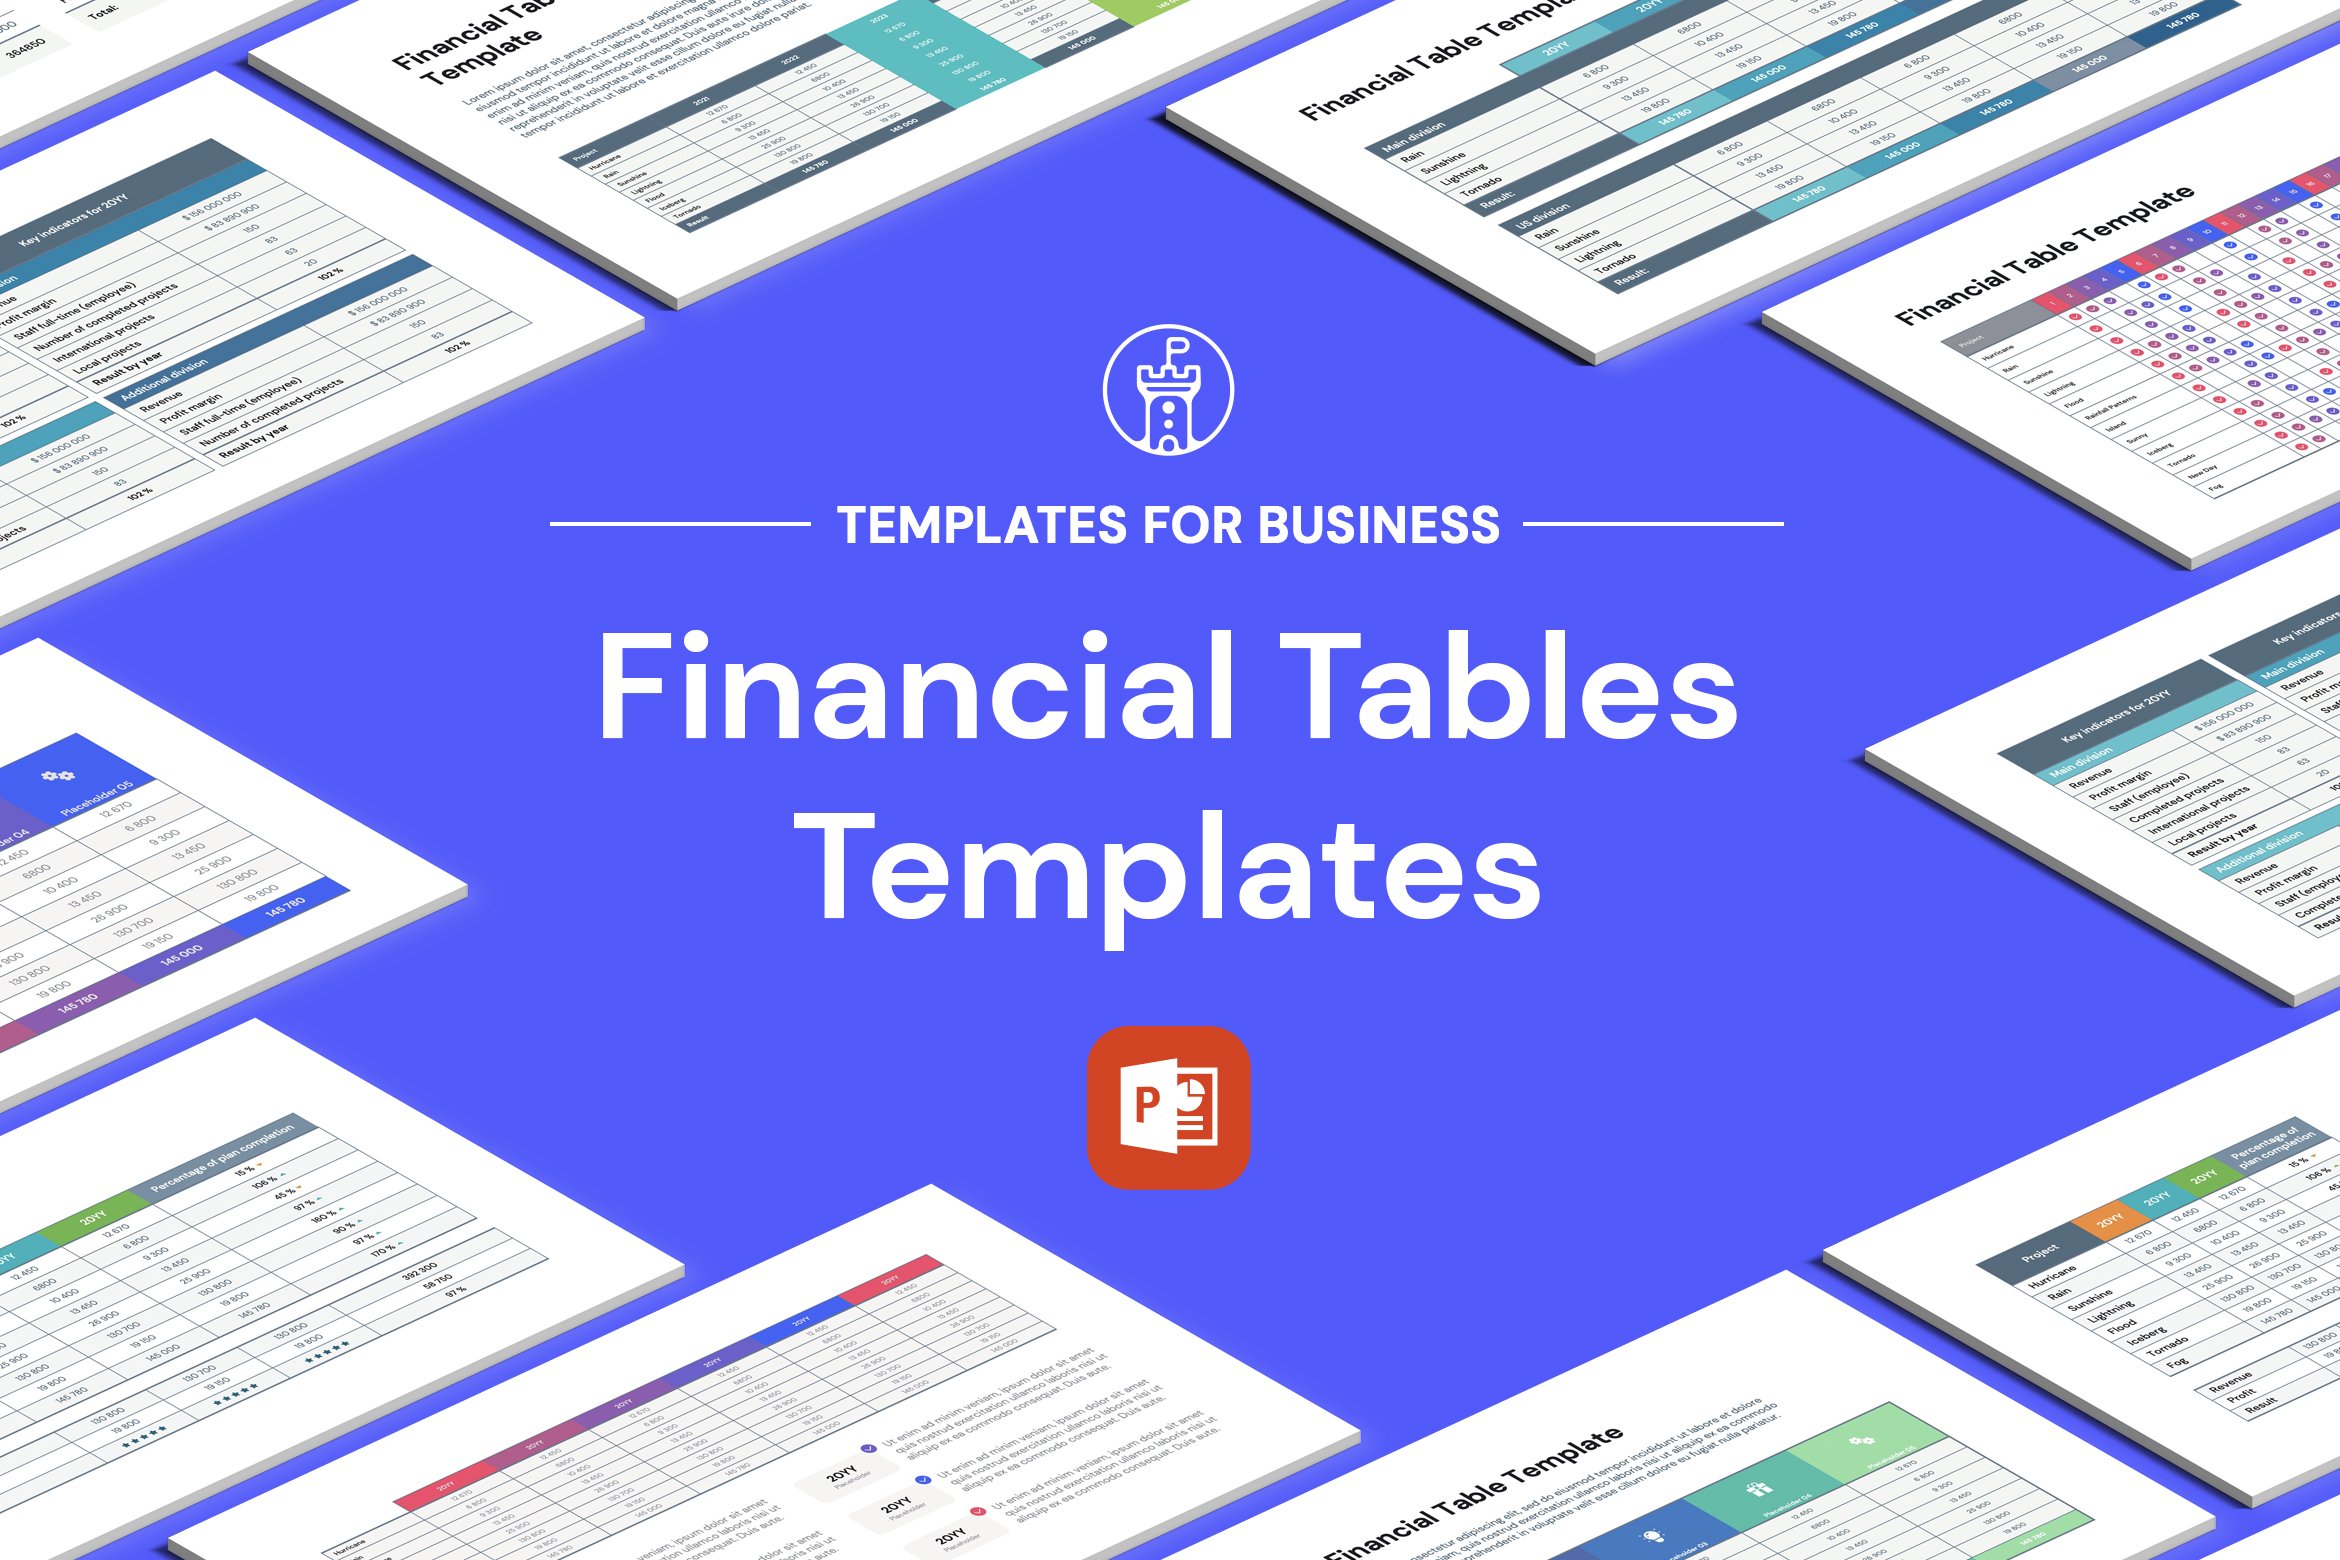 Financial Tables Templates for Power cover image.